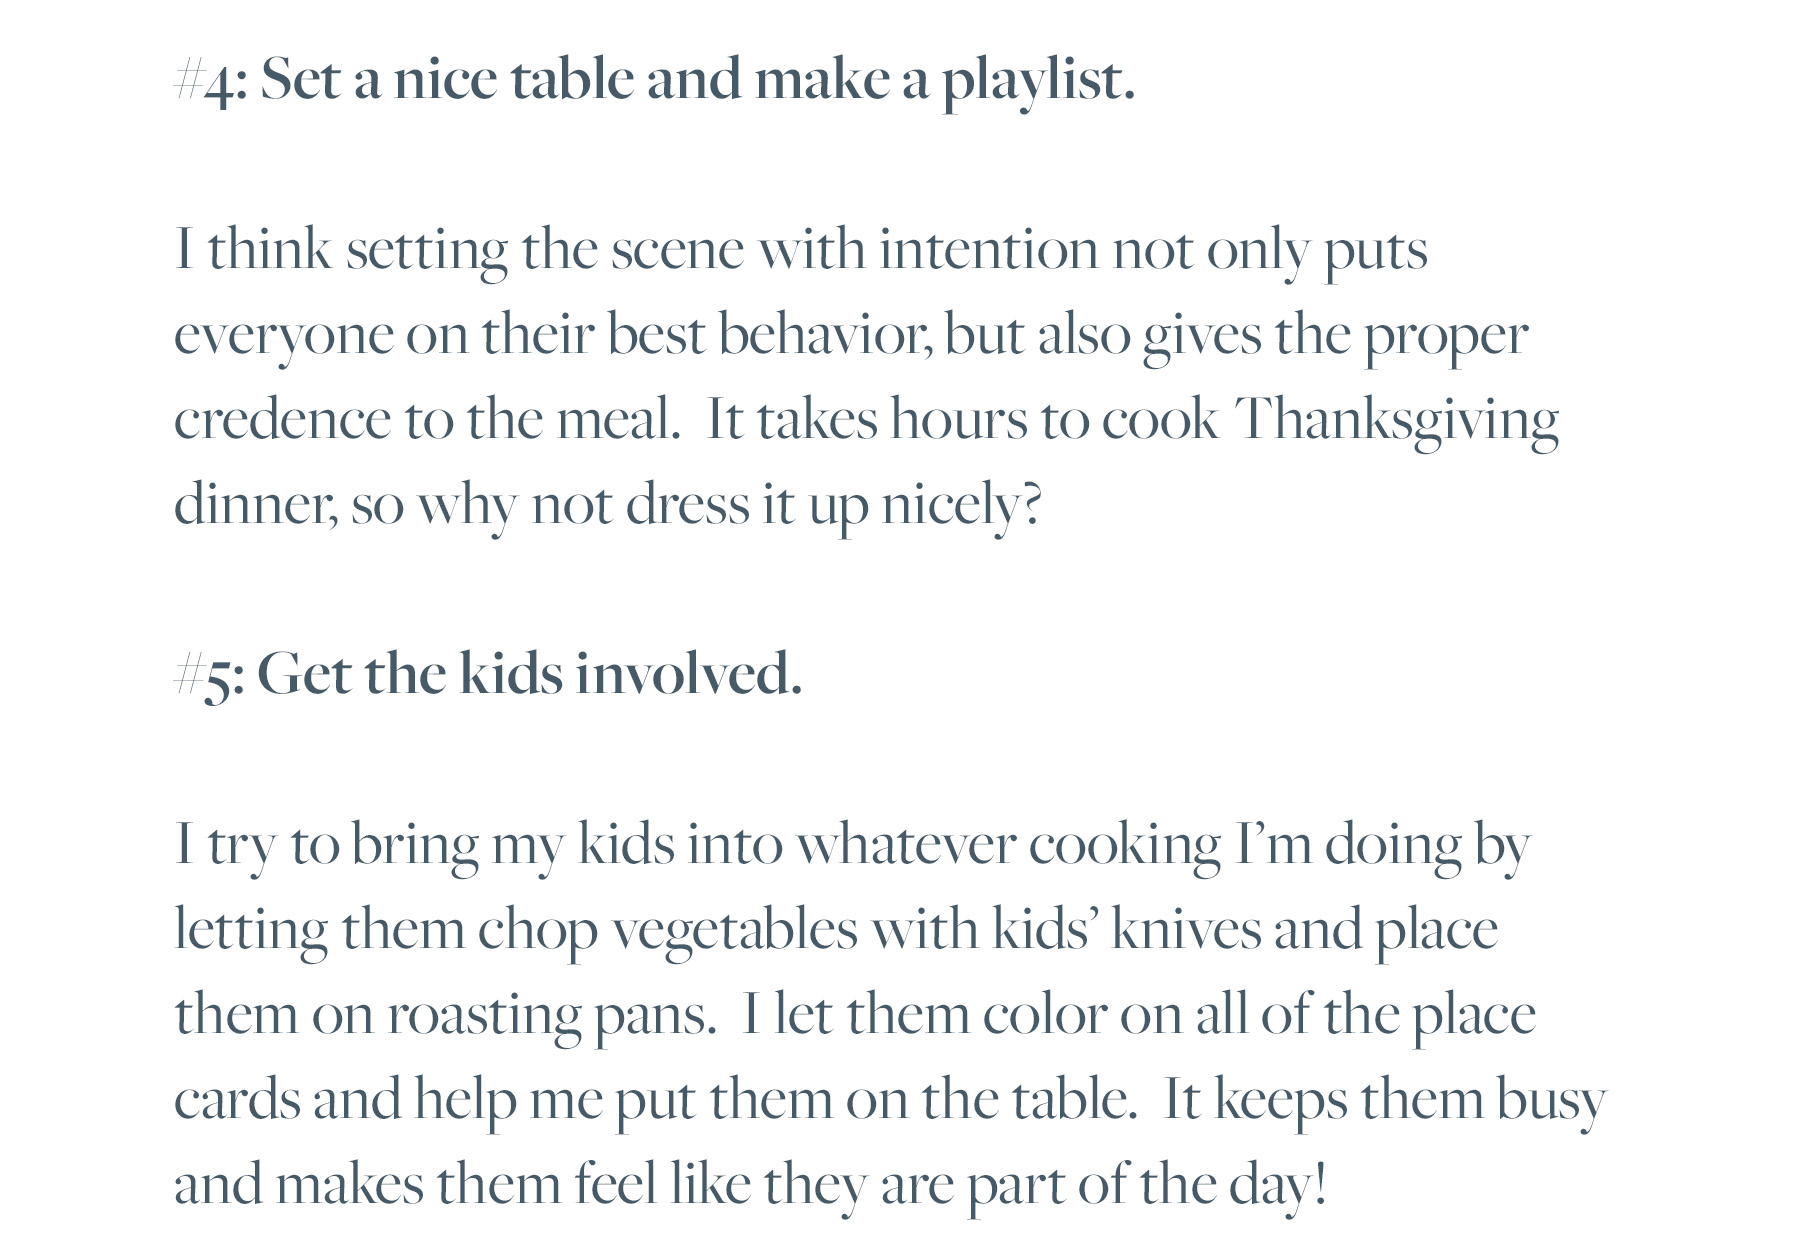 #4: Set a nice table and make a playlist. I think setting the scene with intention not only puts everyone on their best behavior, but also gives the proper credence to the meal. It takes hours to cook Thanksgiving dinner, so why not dress it up nicely? #5: Get the kids involved. I try to bring my kids into whatever cooking I’m doing by letting them chop vegetables with kids’ knives and place them on roasting pans. I let them color on all of the place cards and help me put them on the table. It keeps them busy and makes them feel like they are part of the day!